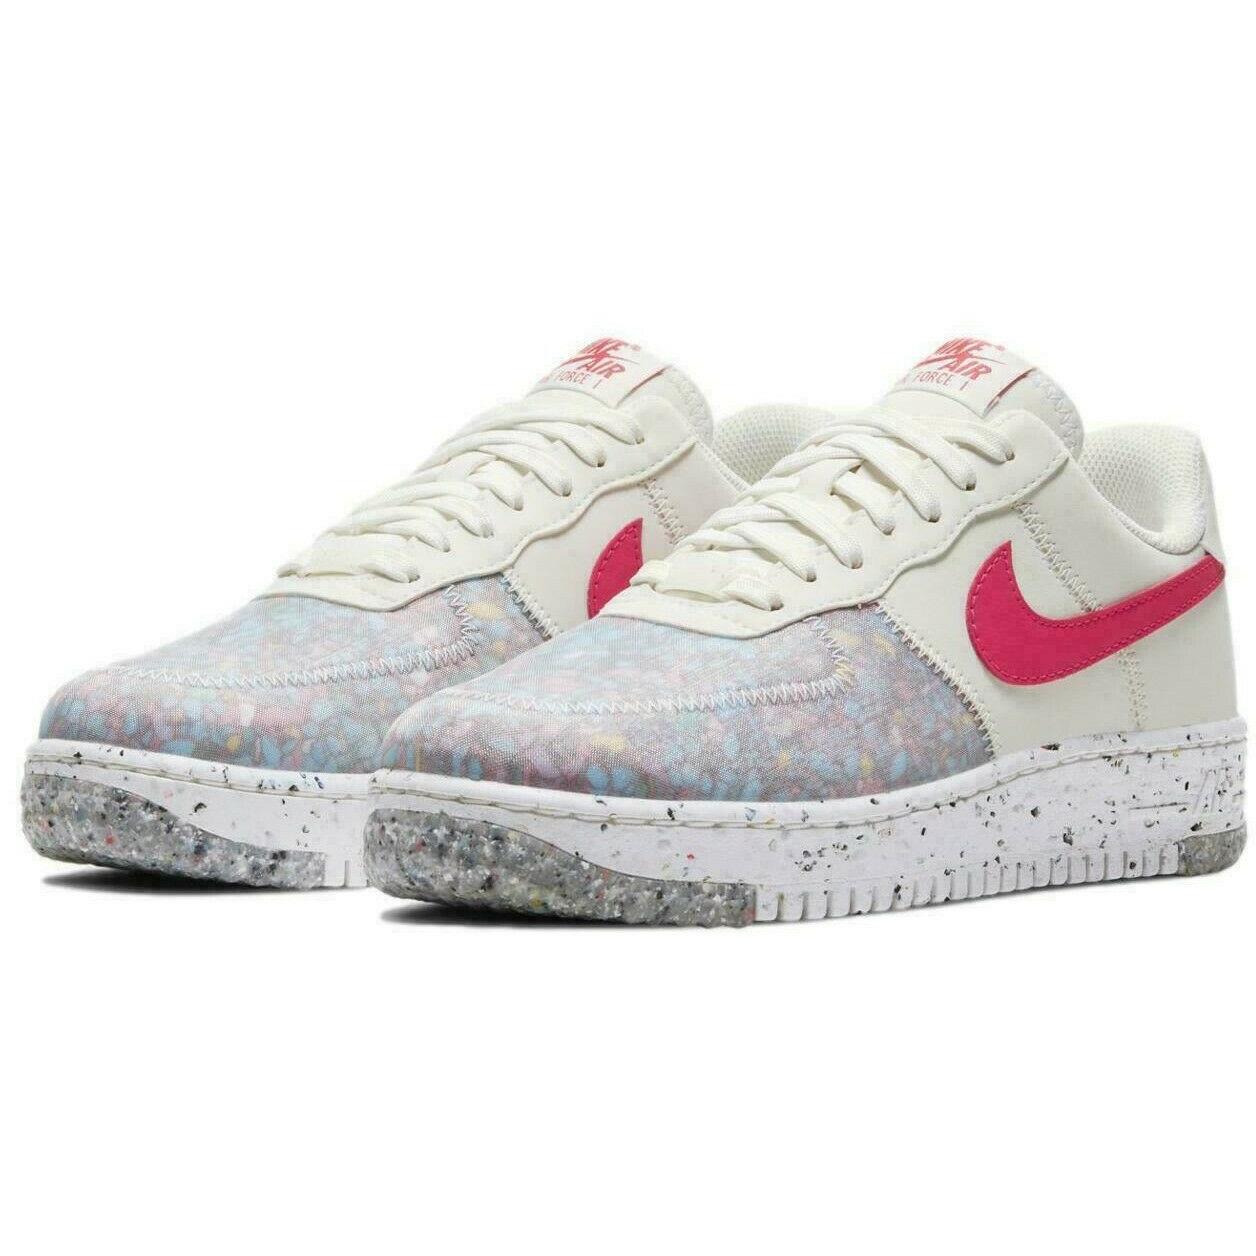 Nike Air Force 1 Crater Womens Size 7.5 Sneakers Shoes CT1986 101 Sired Red